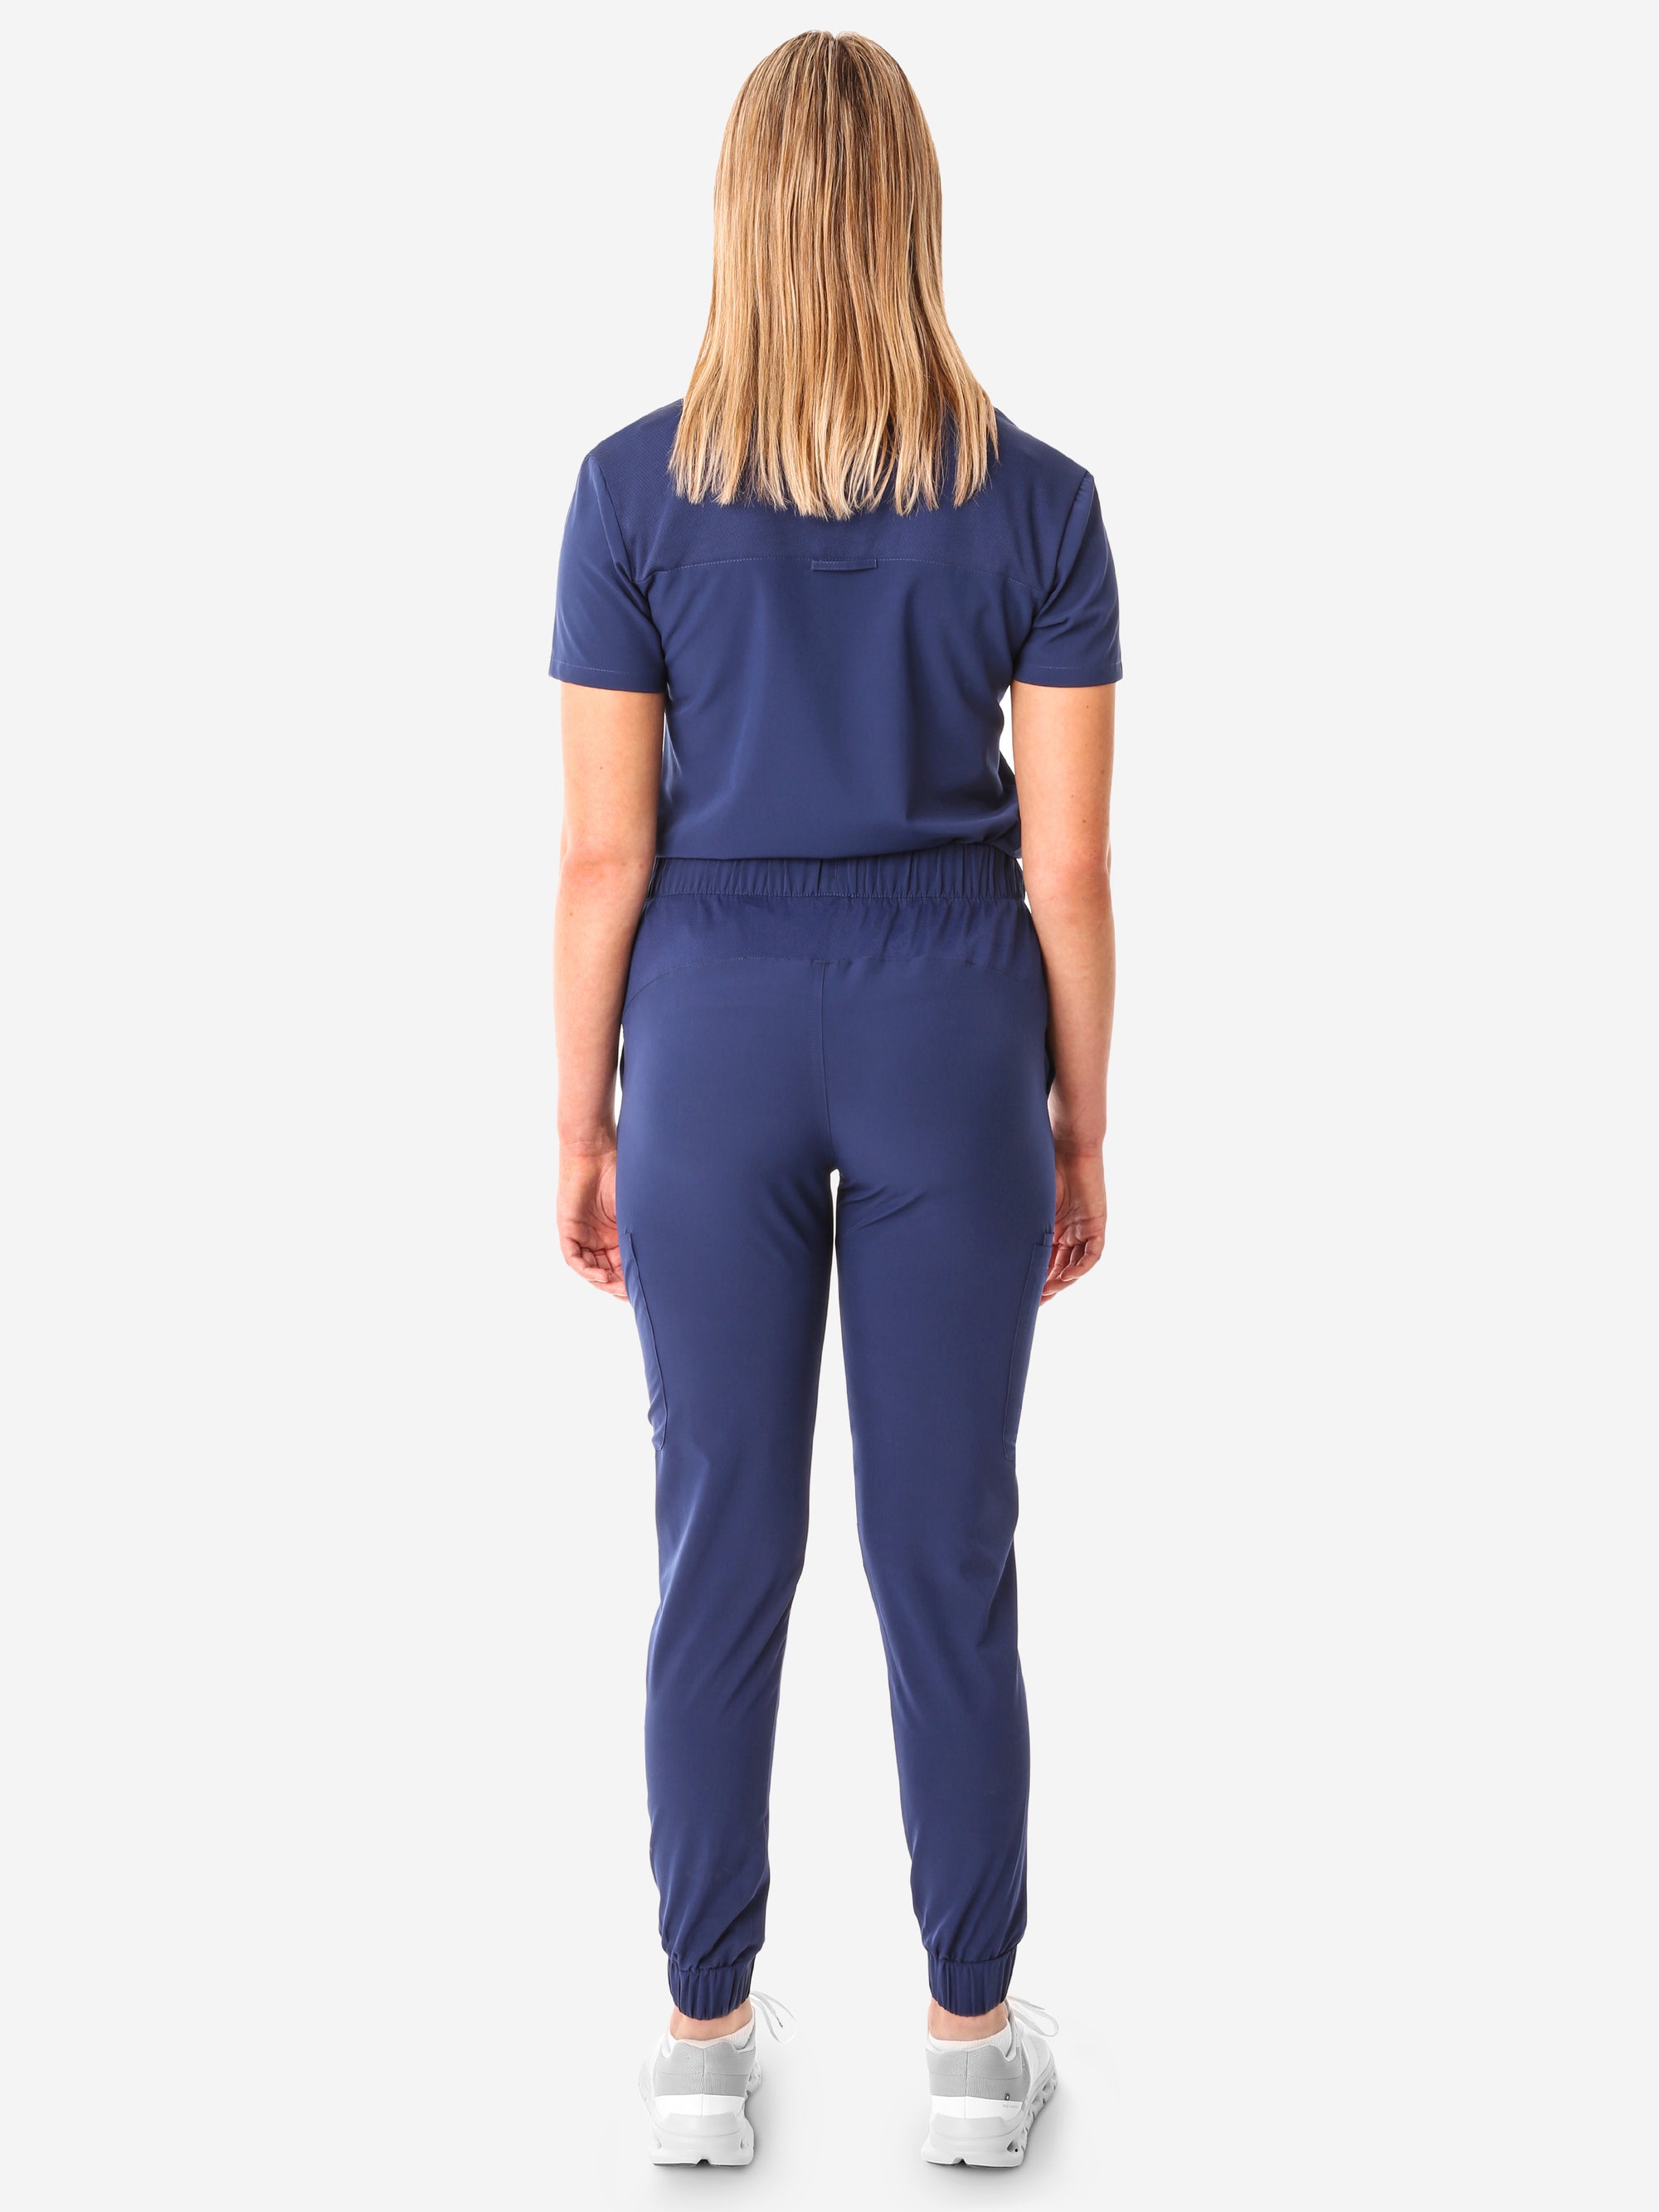 TiScrubs Navy Blue Women's Stretch Perfect Jogger Pants and One-Pocket Tuckable Top Back View Full Body